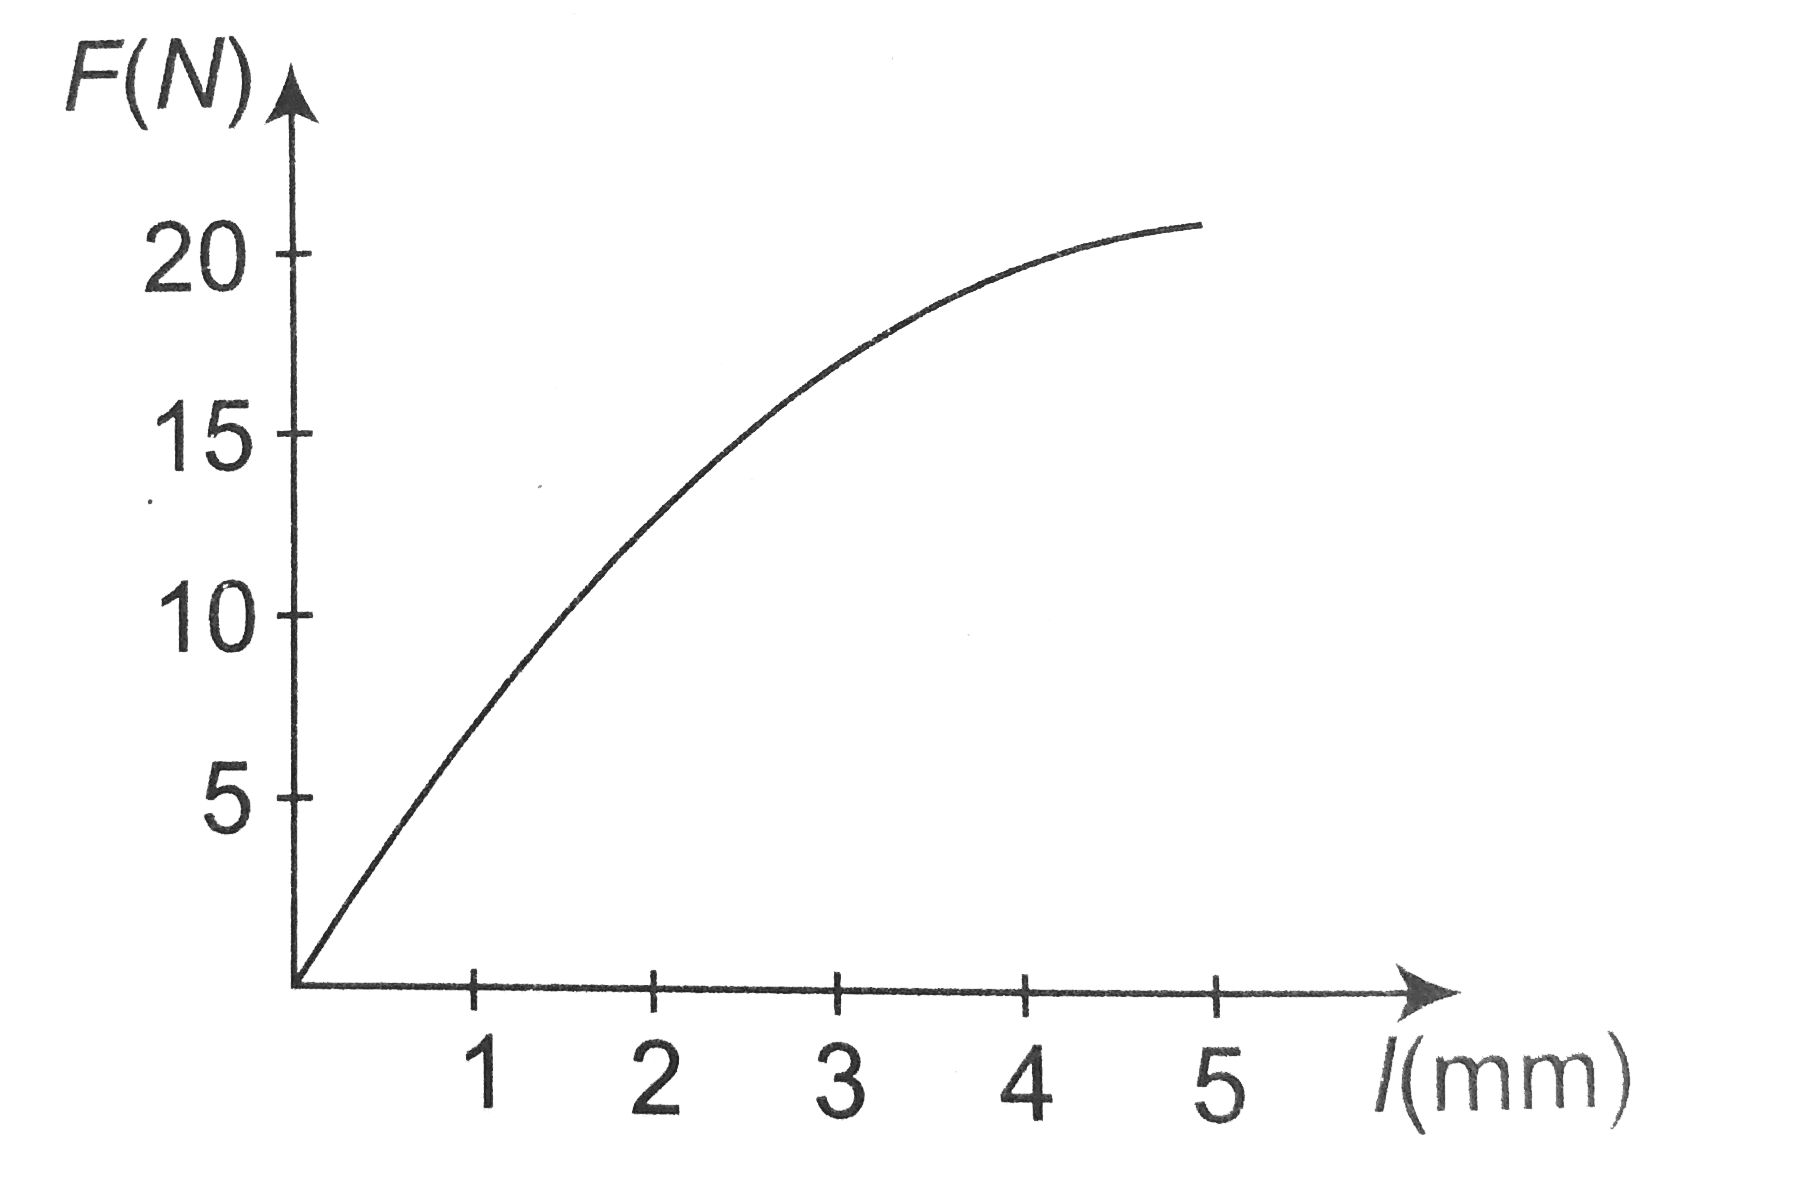 The force (F)- extension (lamda) graph shows that the strain energy stored in the material under test, for an extension of 4mm, is greater than which of the following values?